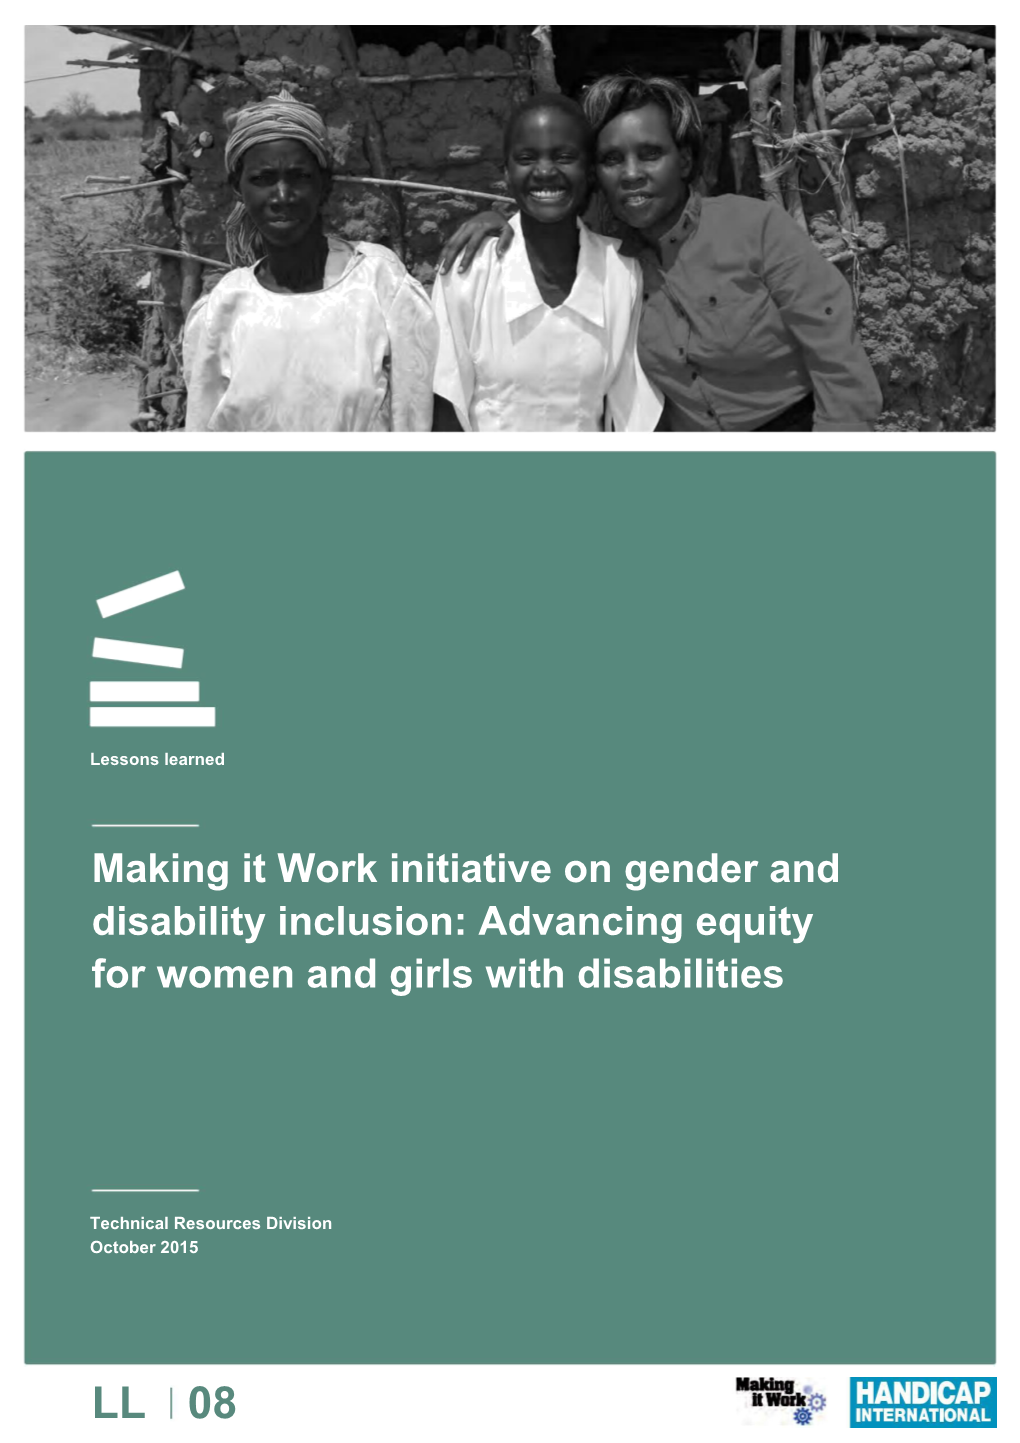 Making It Work Initiative on Gender and Disability Inclusion: Advancing Equity for Women